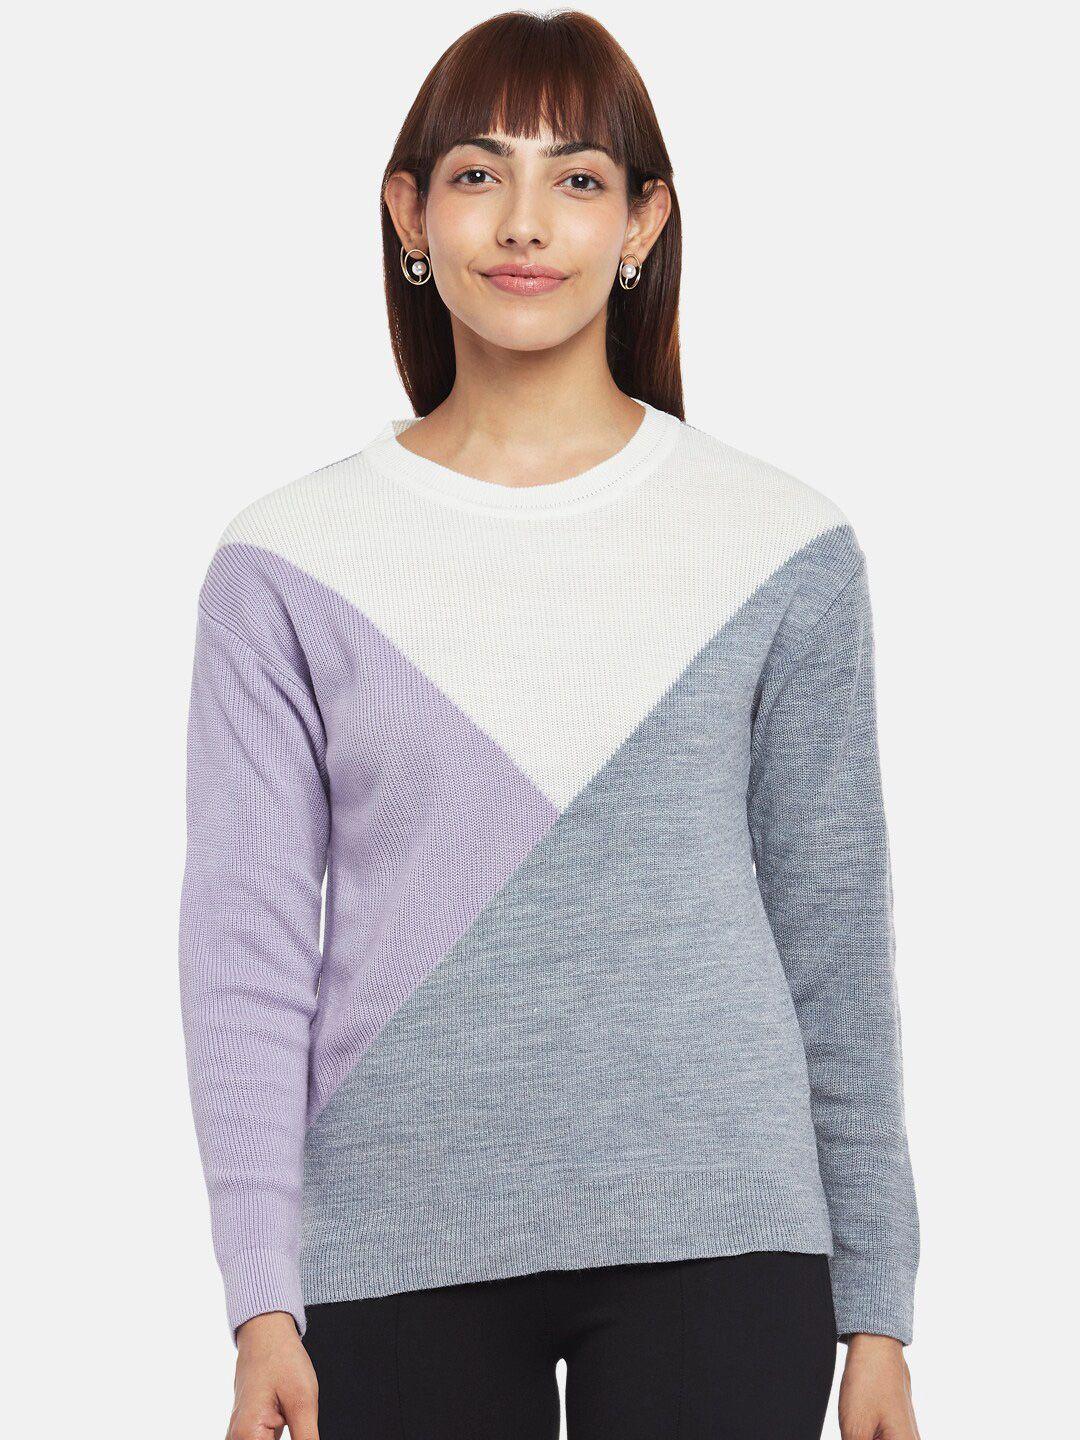 annabelle by pantaloons women grey & white colourblocked pullover